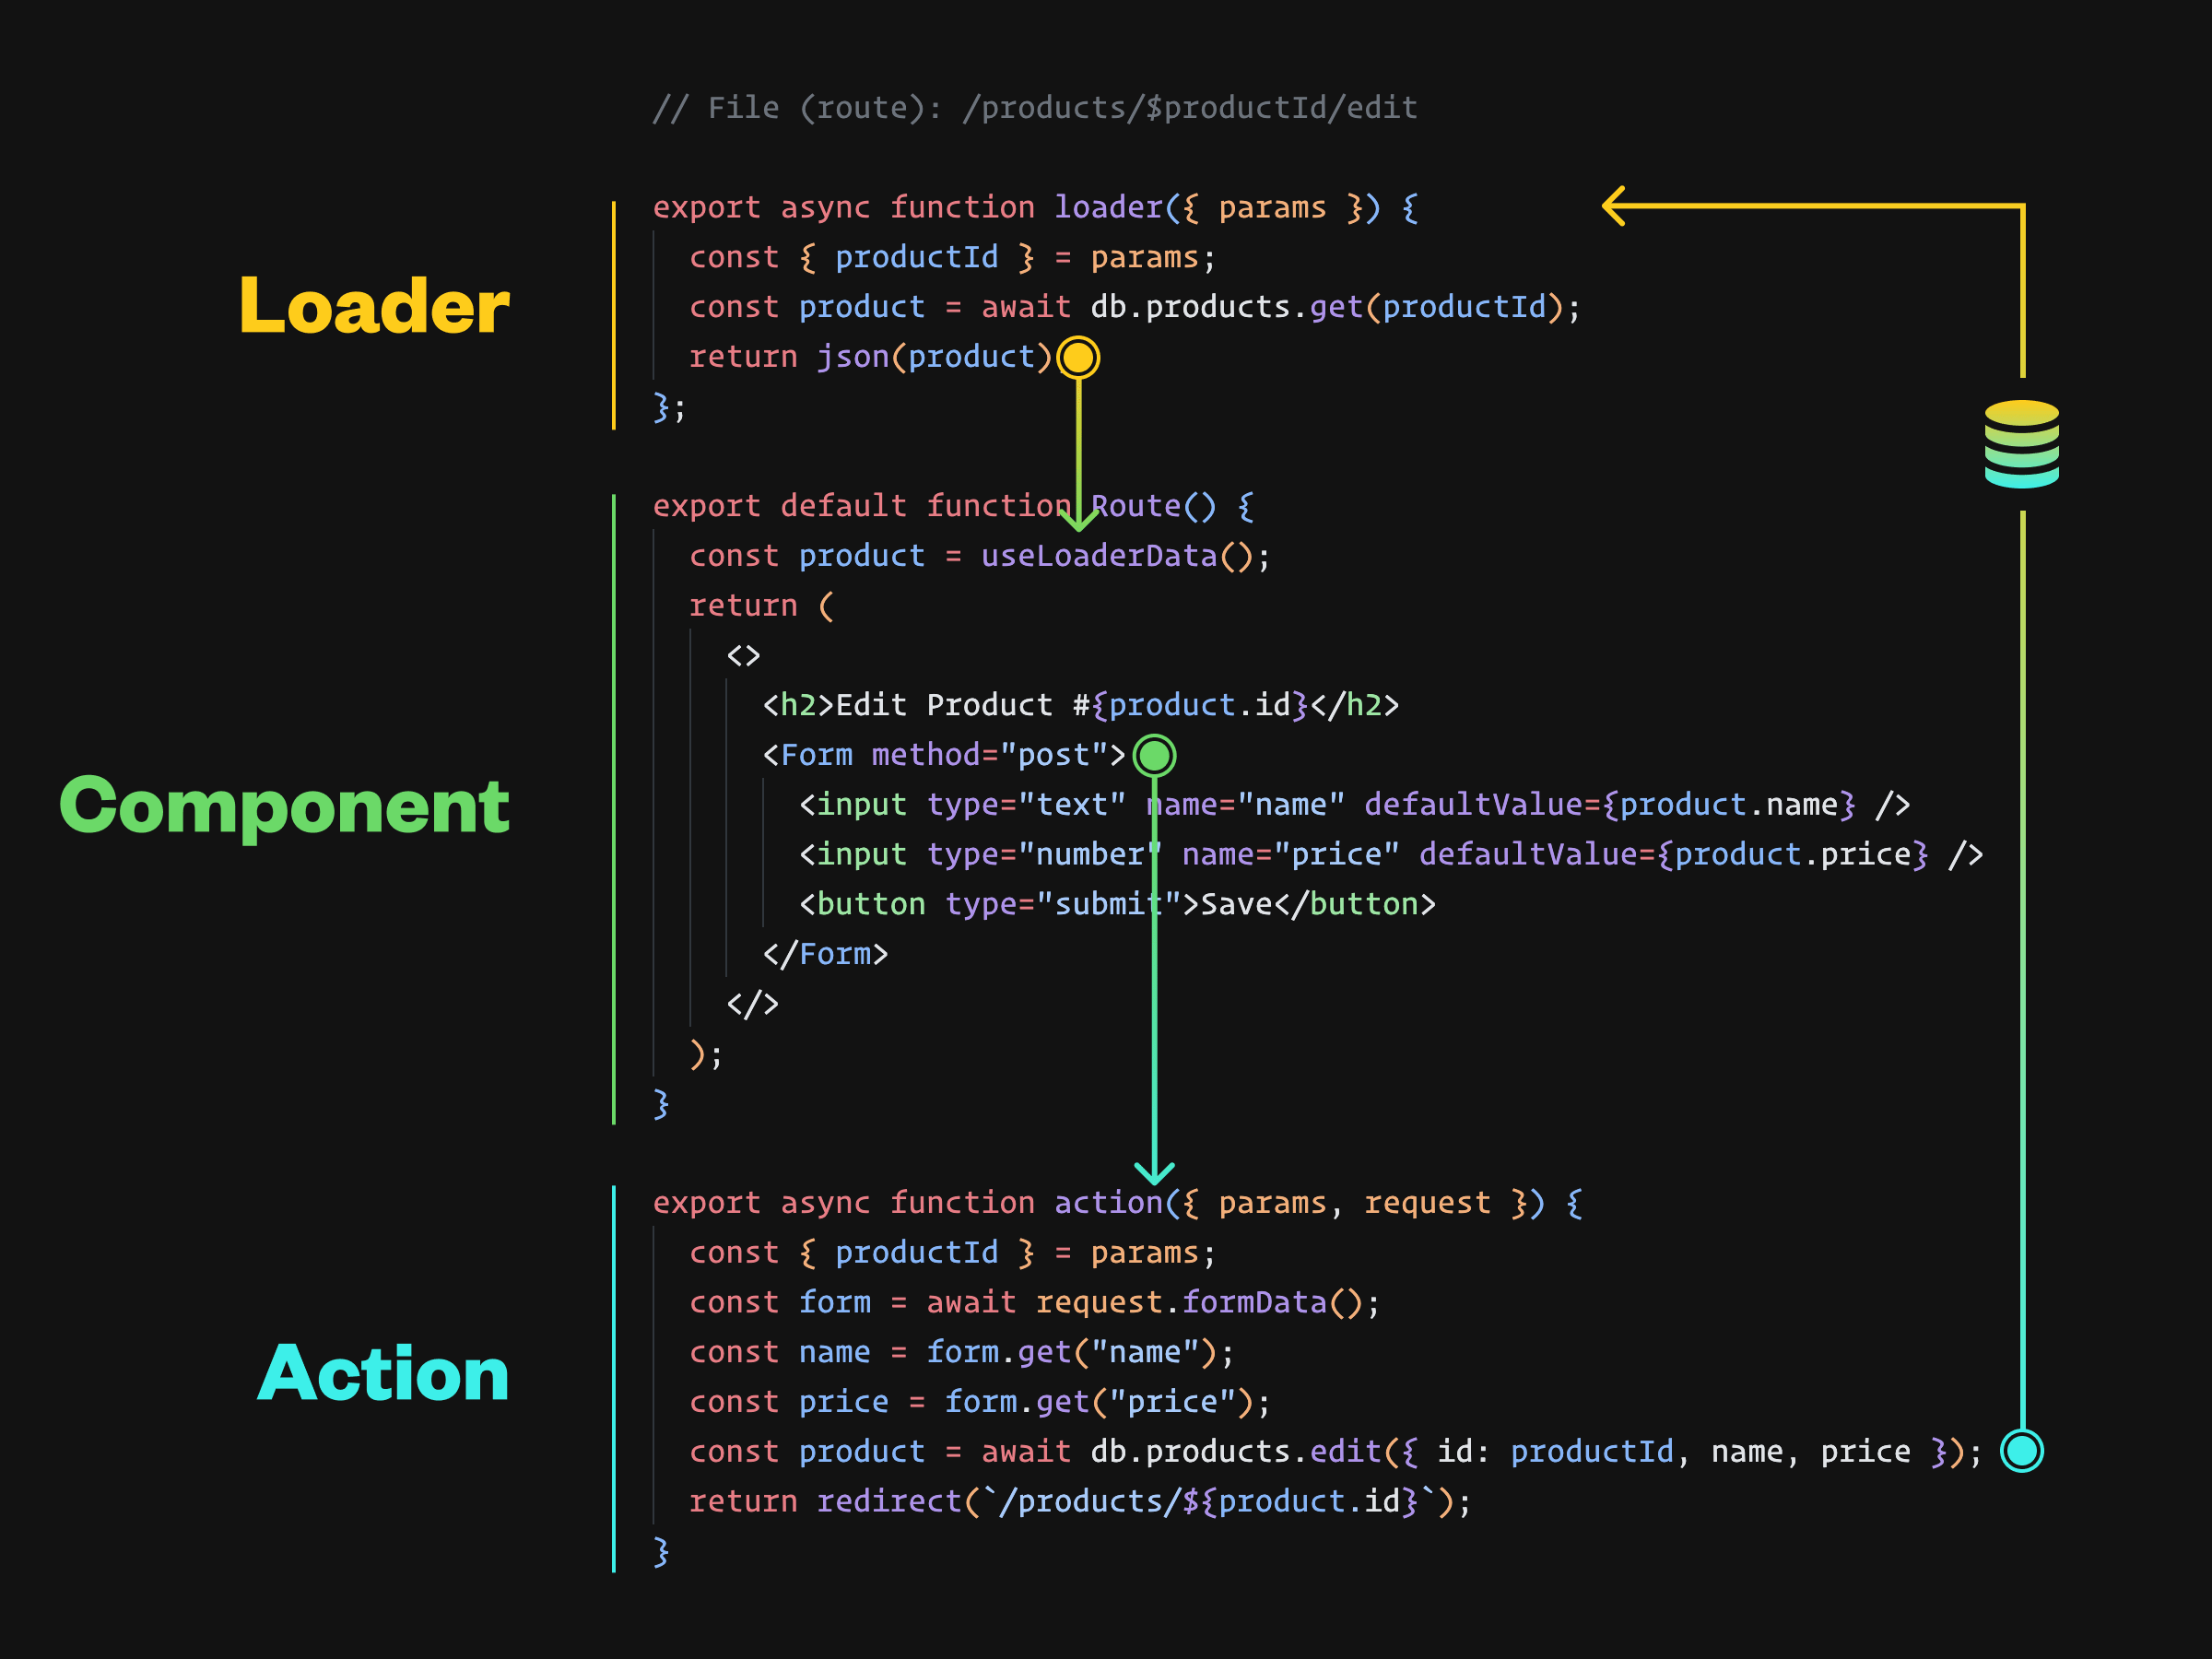 Screenshot of code example in Remix illustrating the one-way, cyclical flow of data through an app. There’s a loader function whose code flows into the Route component whose code, via a <Form> flows into the action function whose code flows back into a loader again.